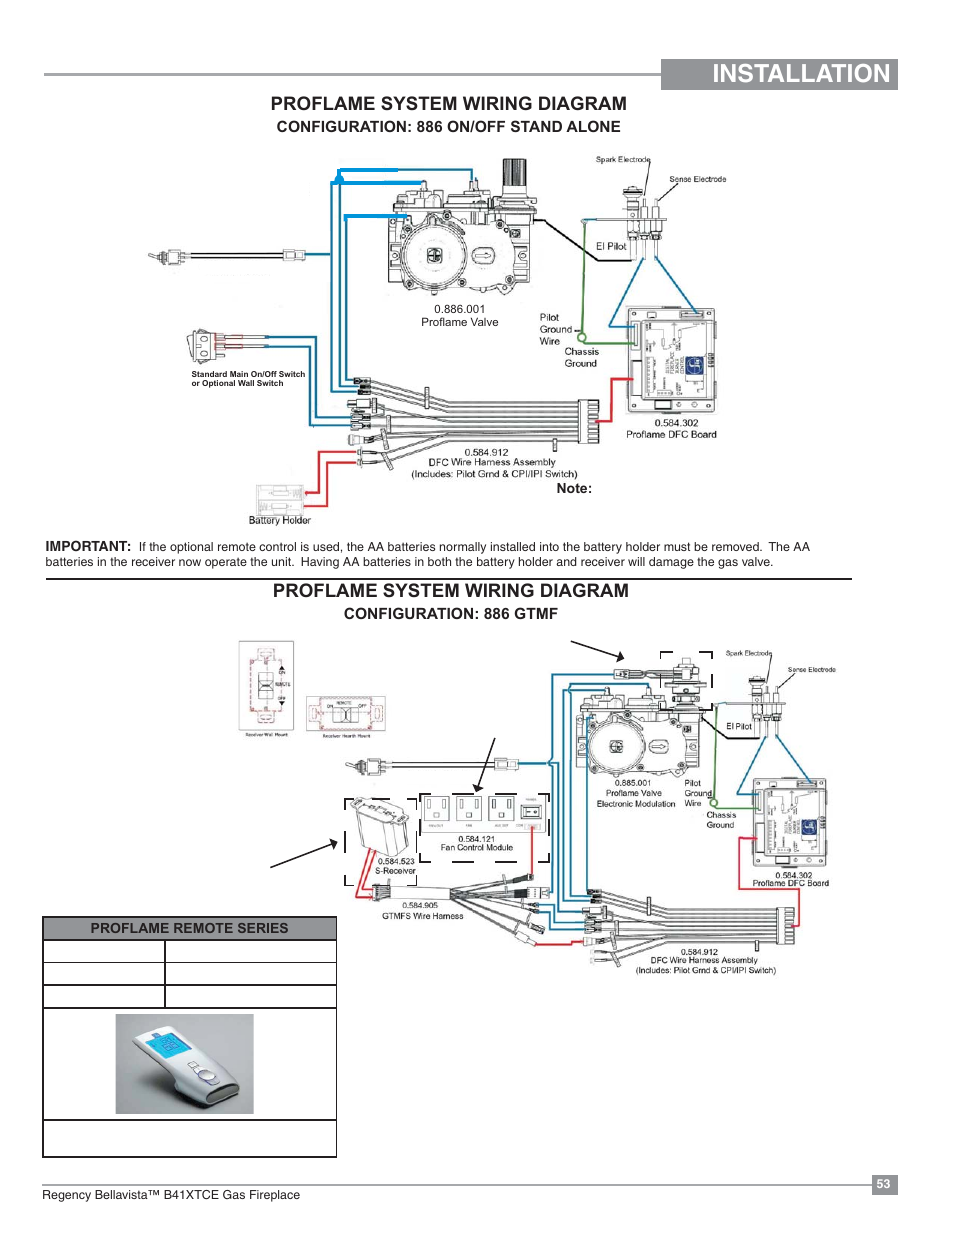 Installation  Proflame System Wiring Diagram